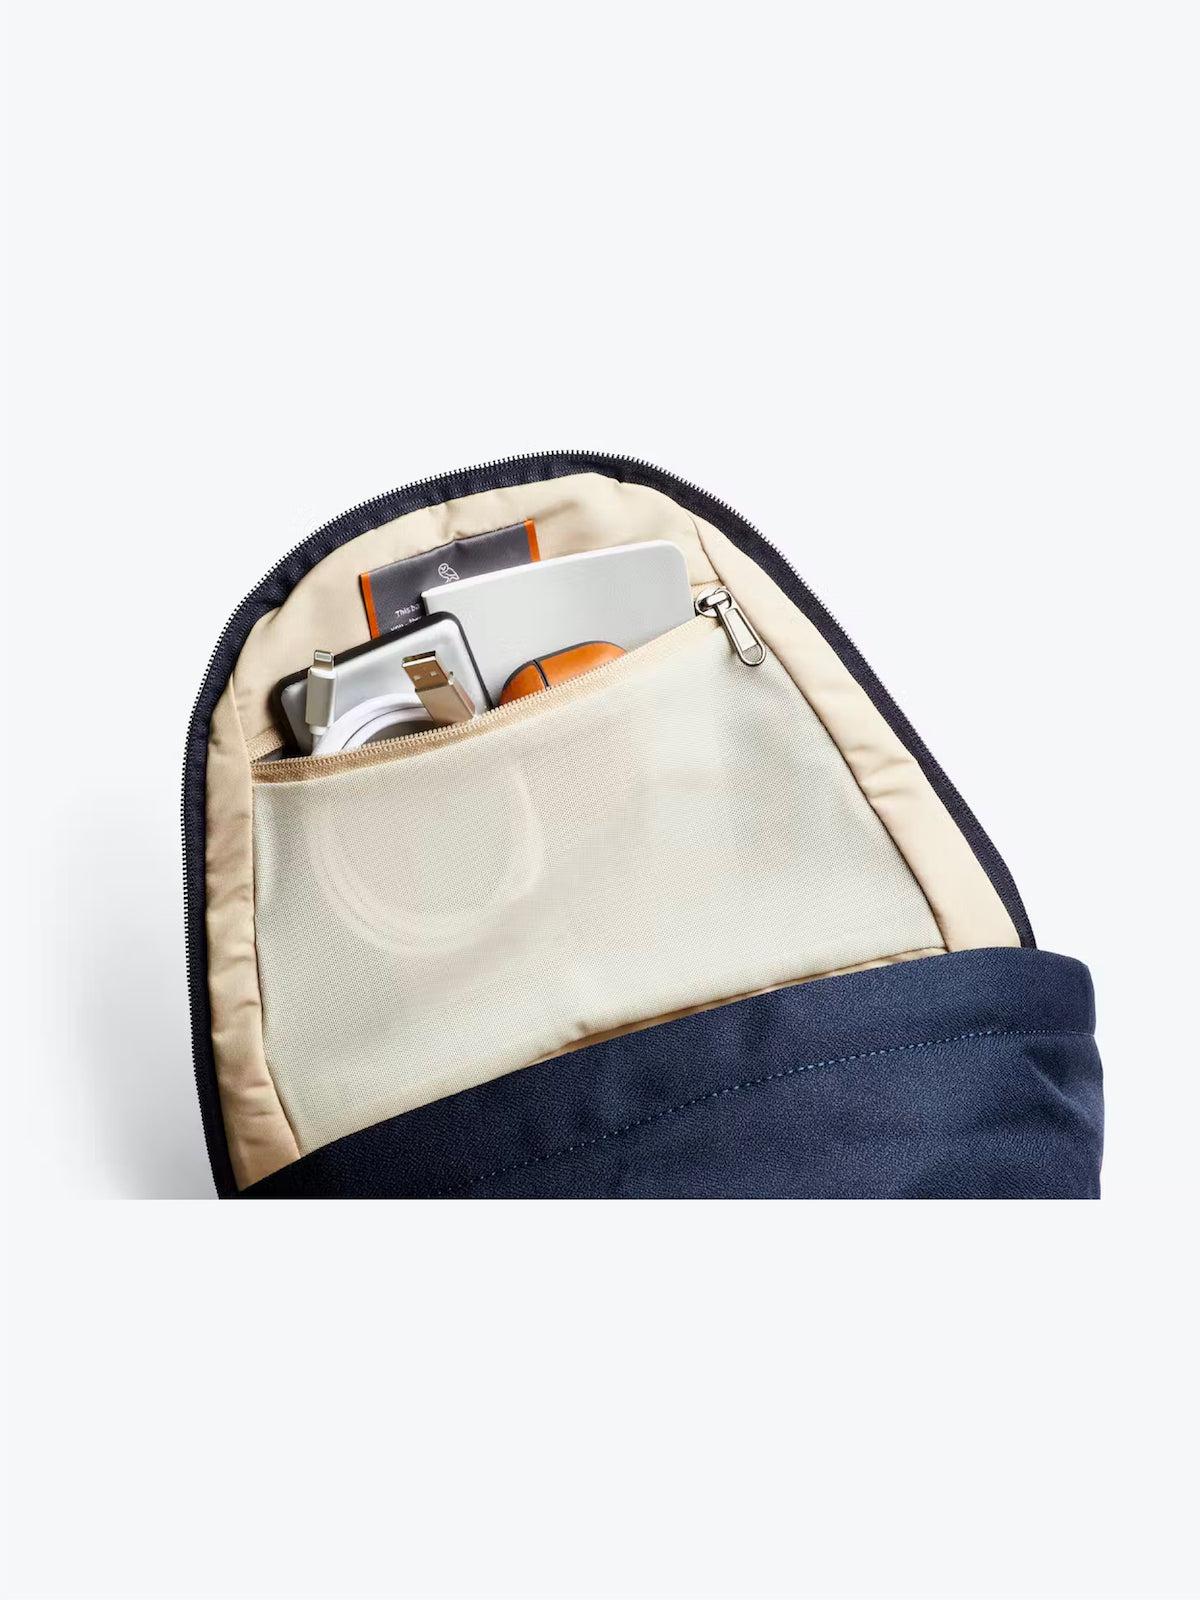 Bellroy Classic Backpack Compact Navy